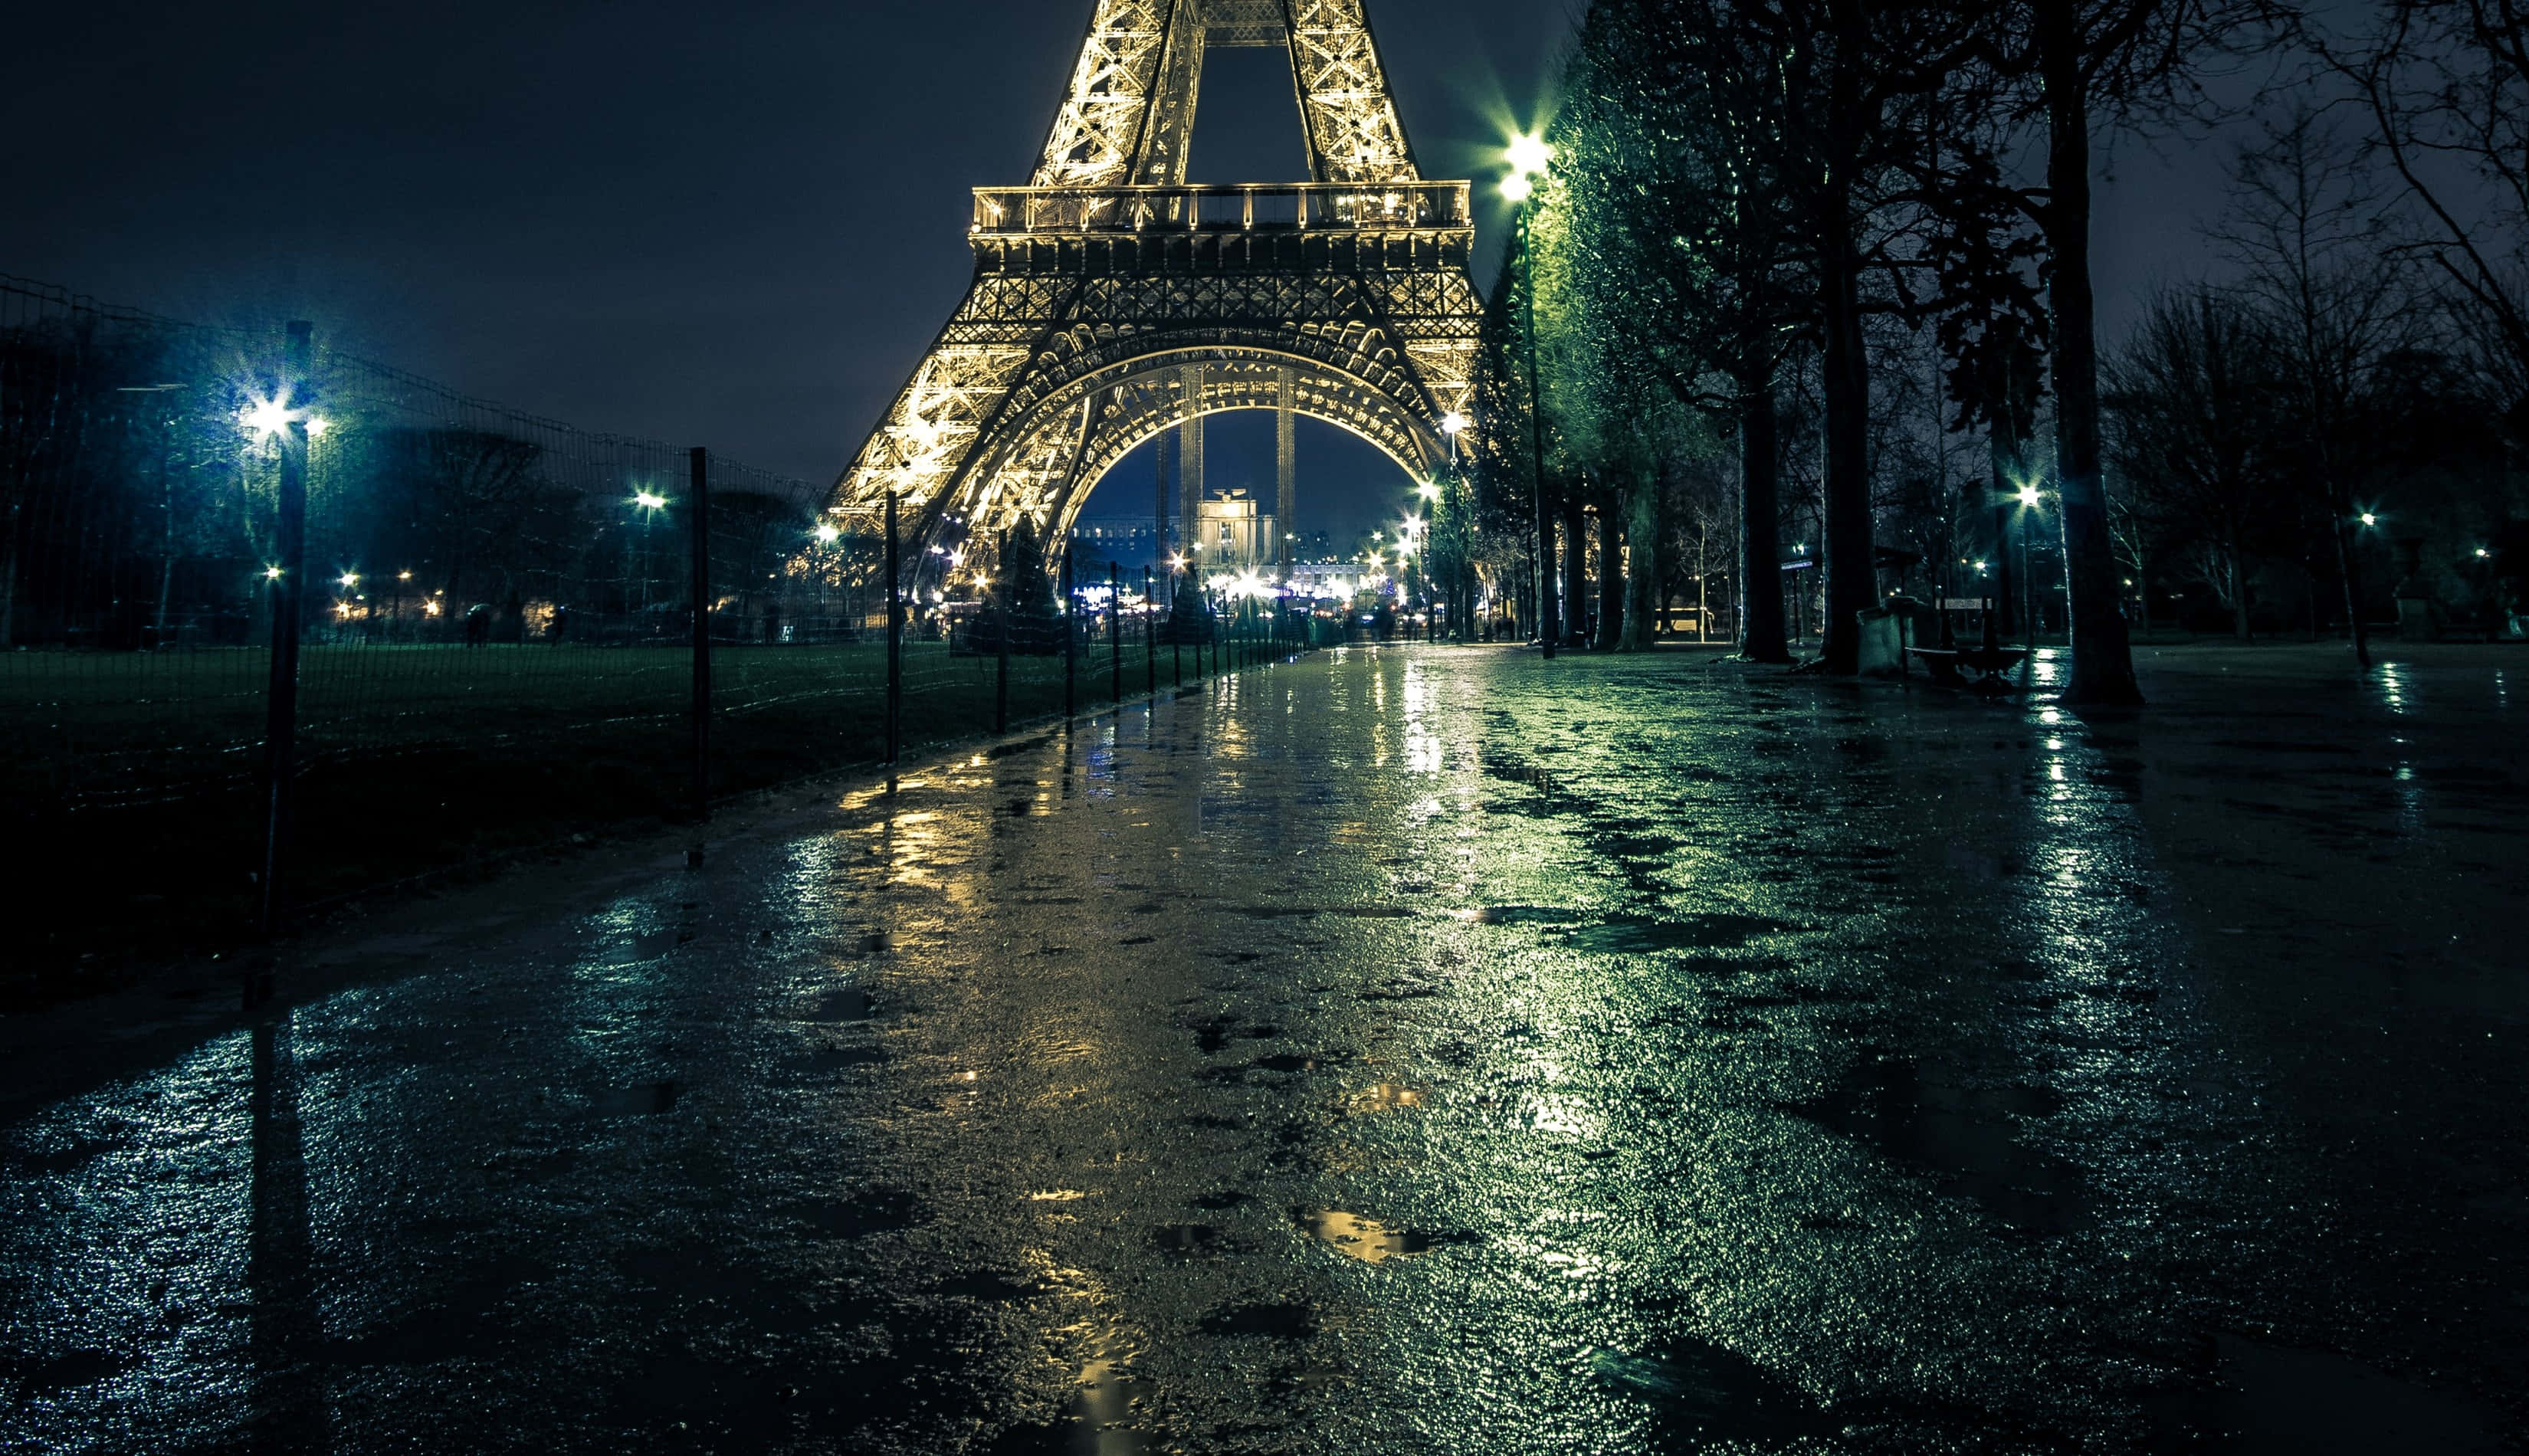 The iconic Eiffel Tower lights up the night in Paris